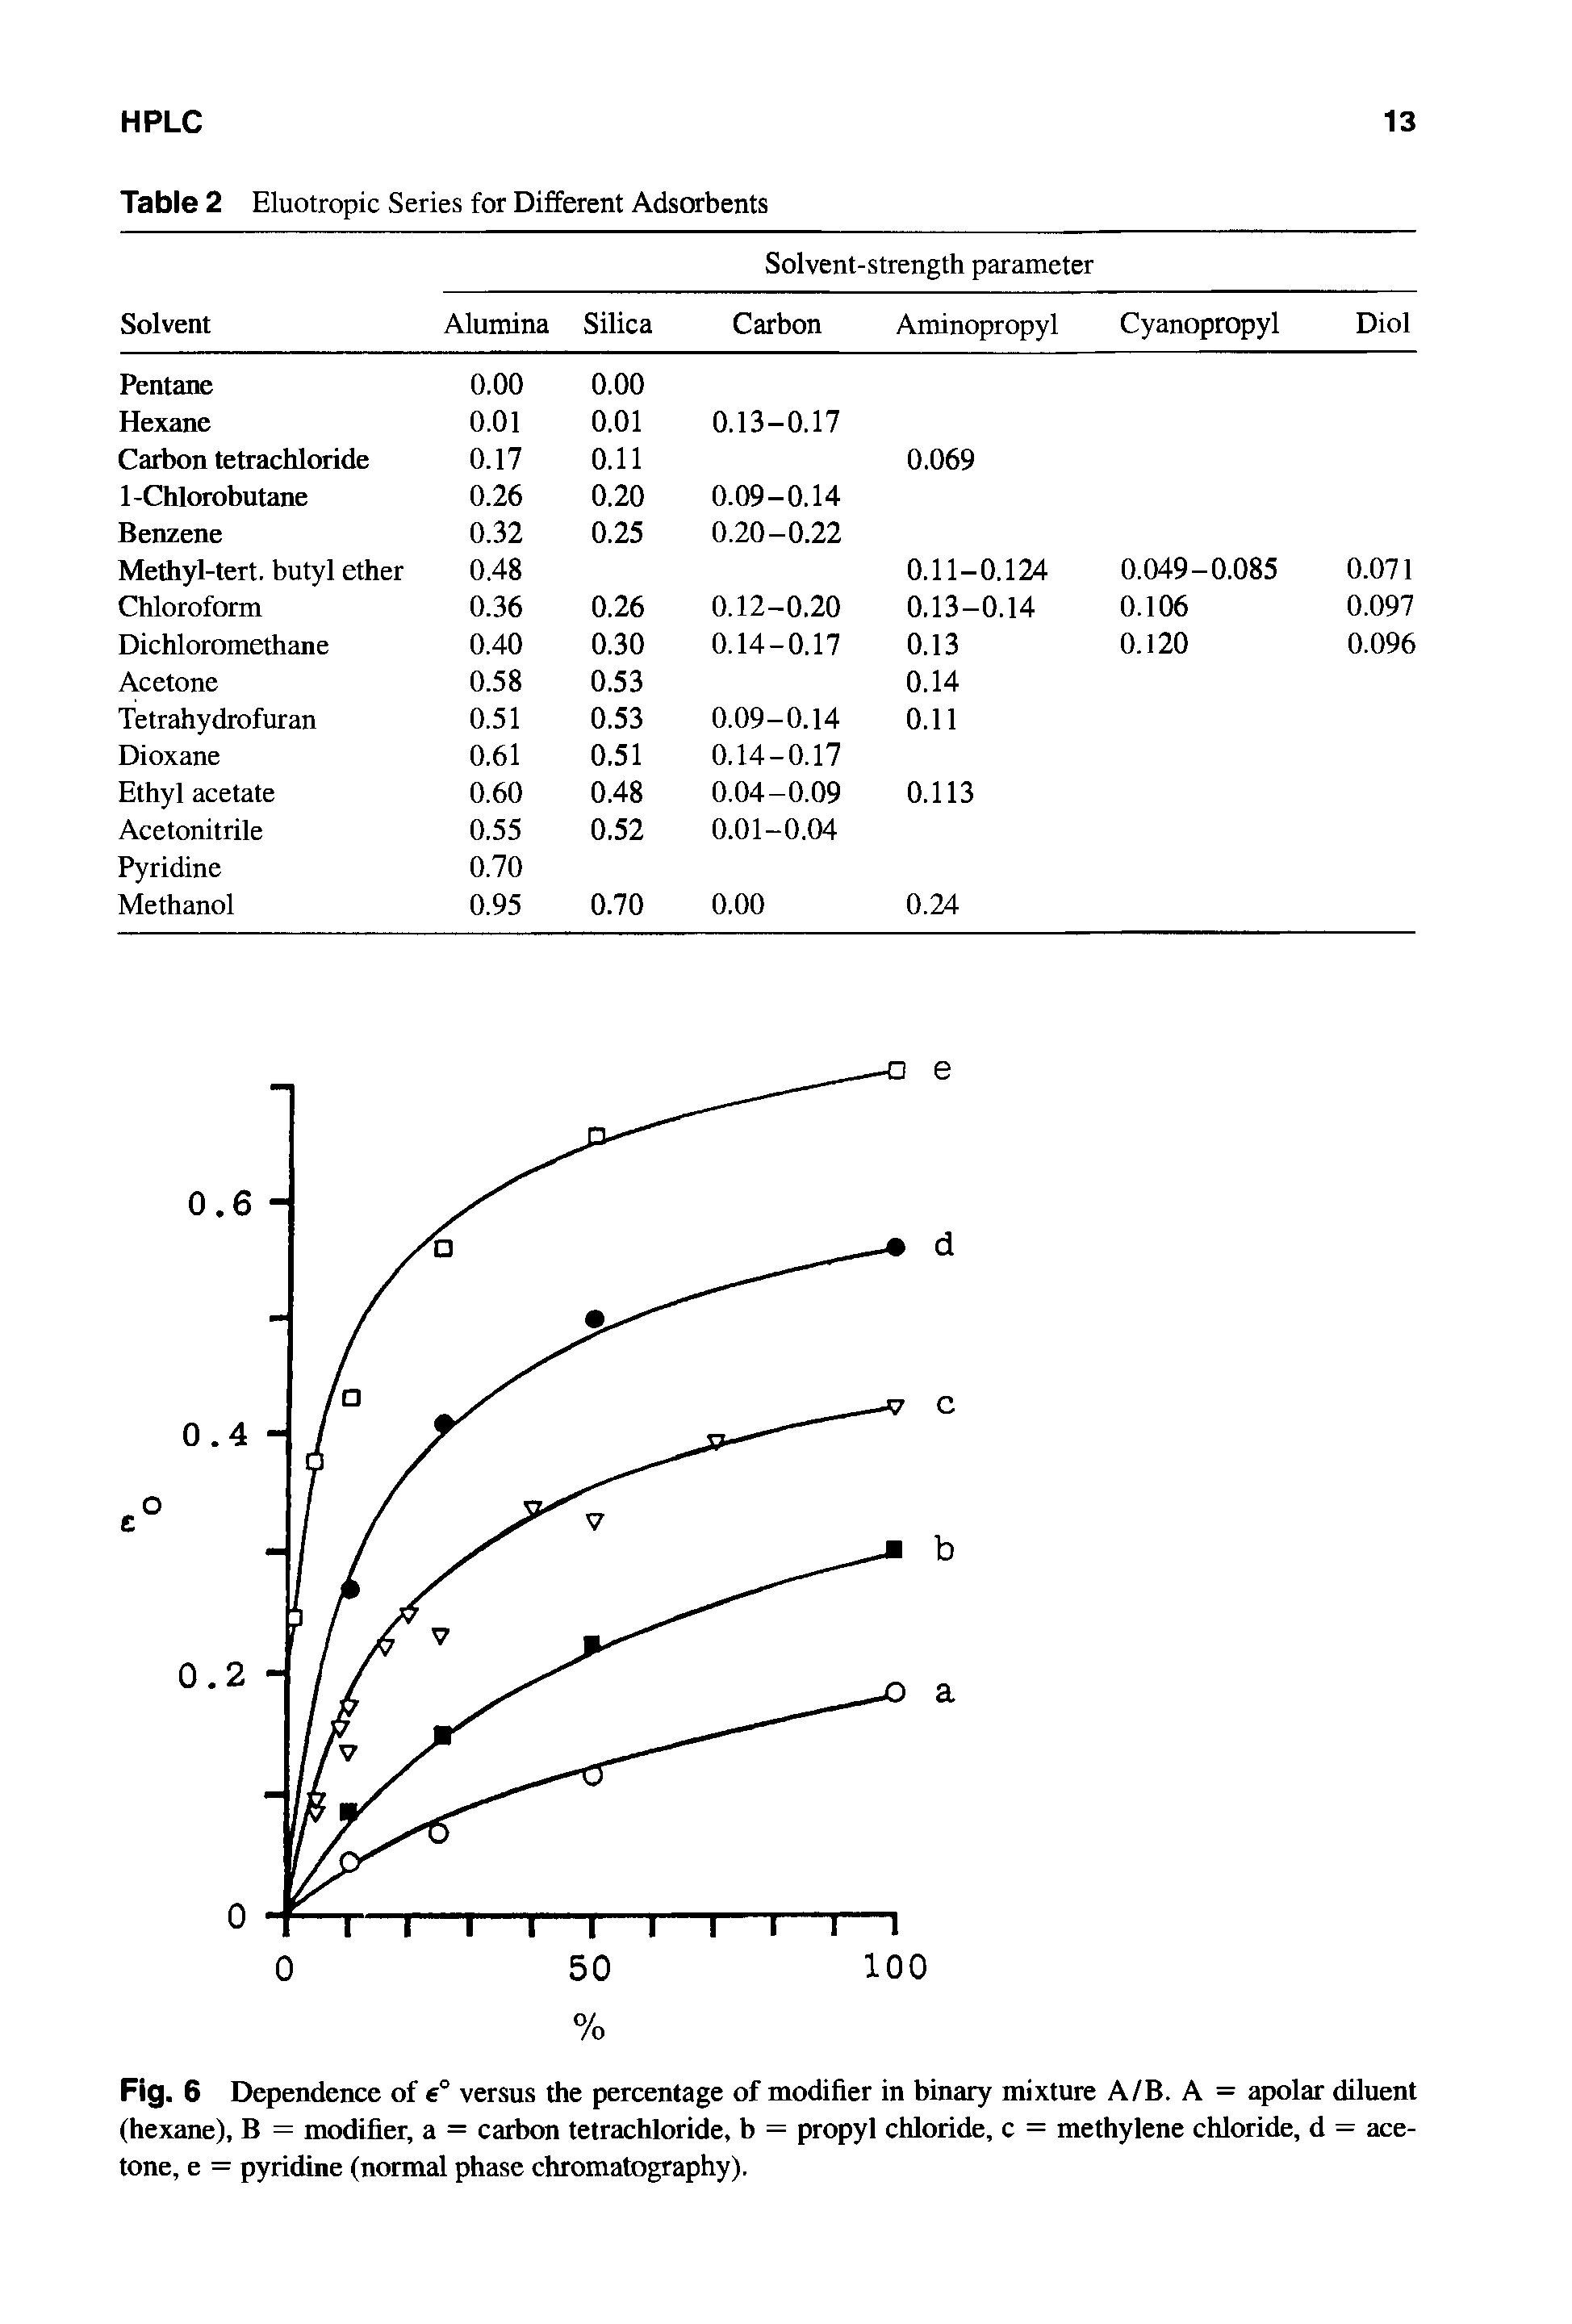 Fig. 6 Dependence of e° versus the percentage of modifier in binary mixture A/B. A = apolar diluent (hexane), B = modifier, a = carbon tetrachloride, b = propyl chloride, c = methylene chloride, d = acetone, e = pyridine (normal phase chromatography).